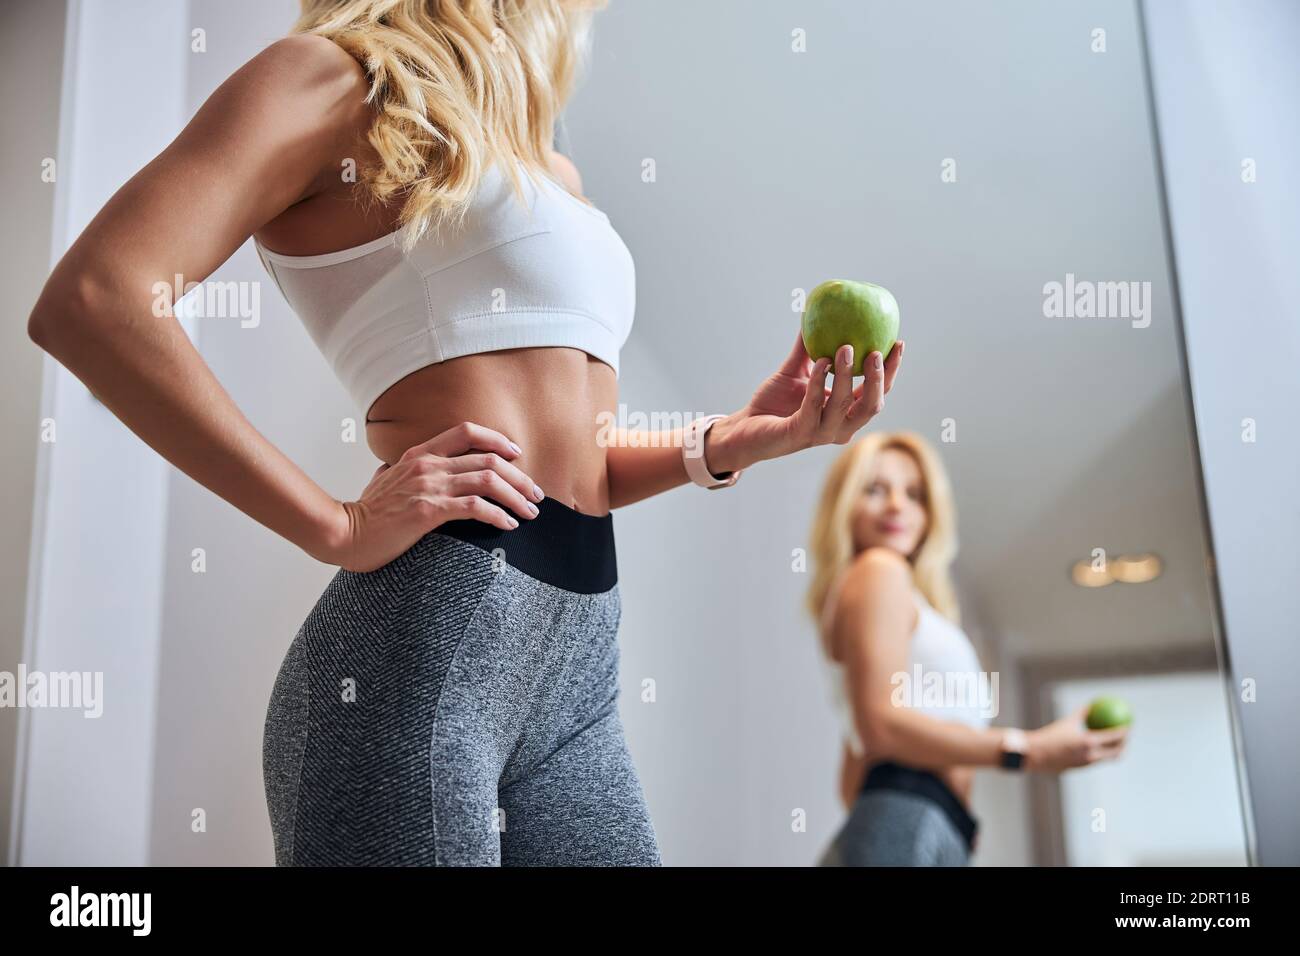 Sport woman in white bra standing in front go the mirror with fruit in cozy room Stock Photo